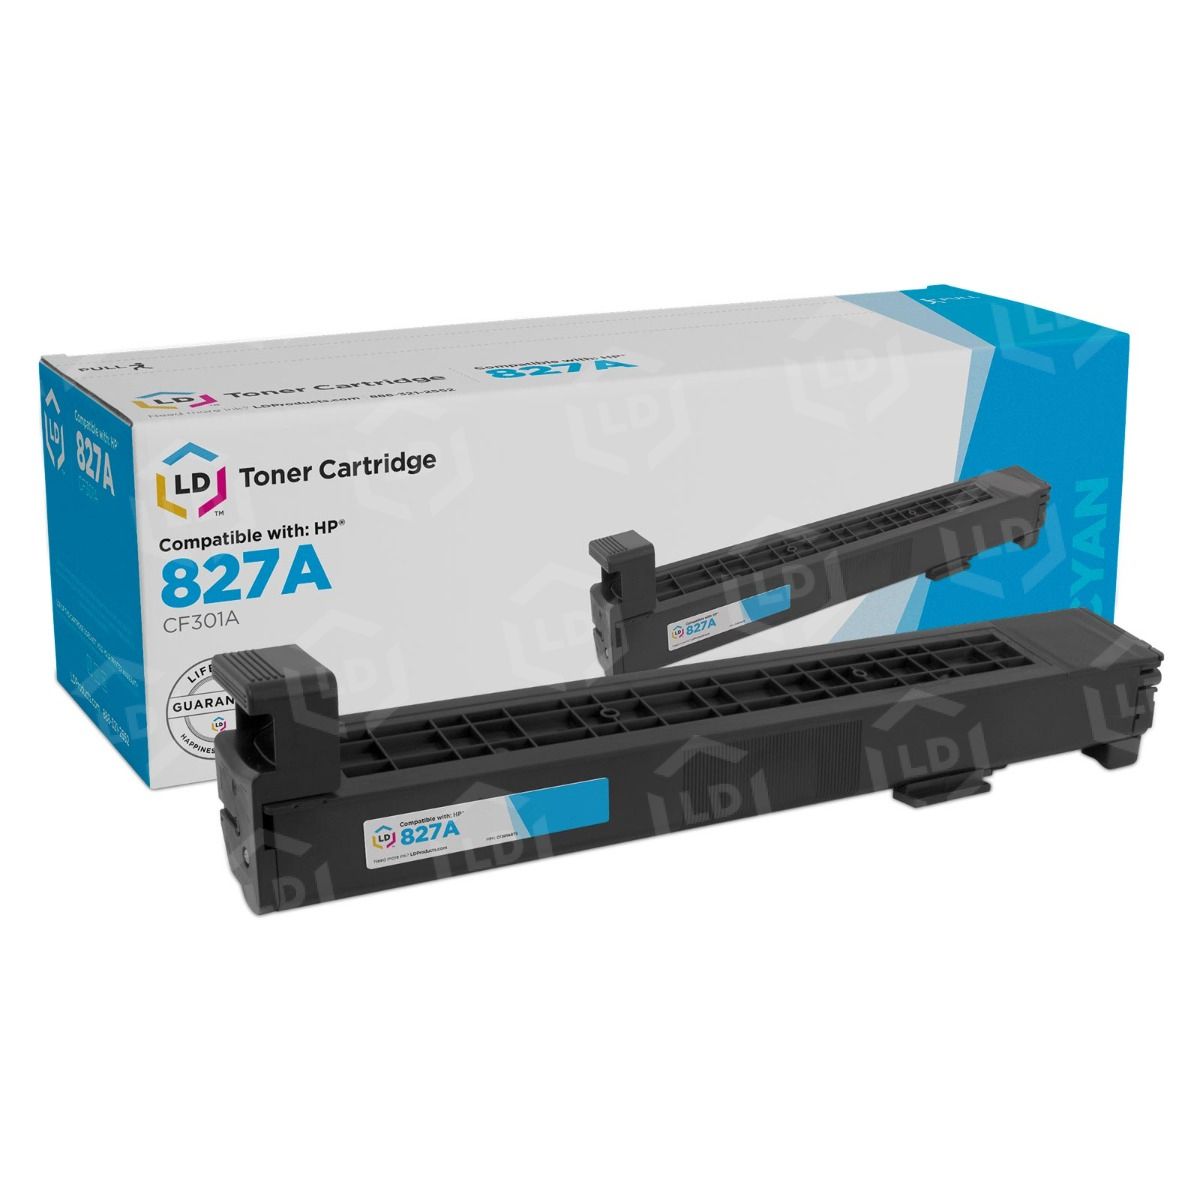 HP 827A Cyan Toner CF301A Low Price All Colors LD Products